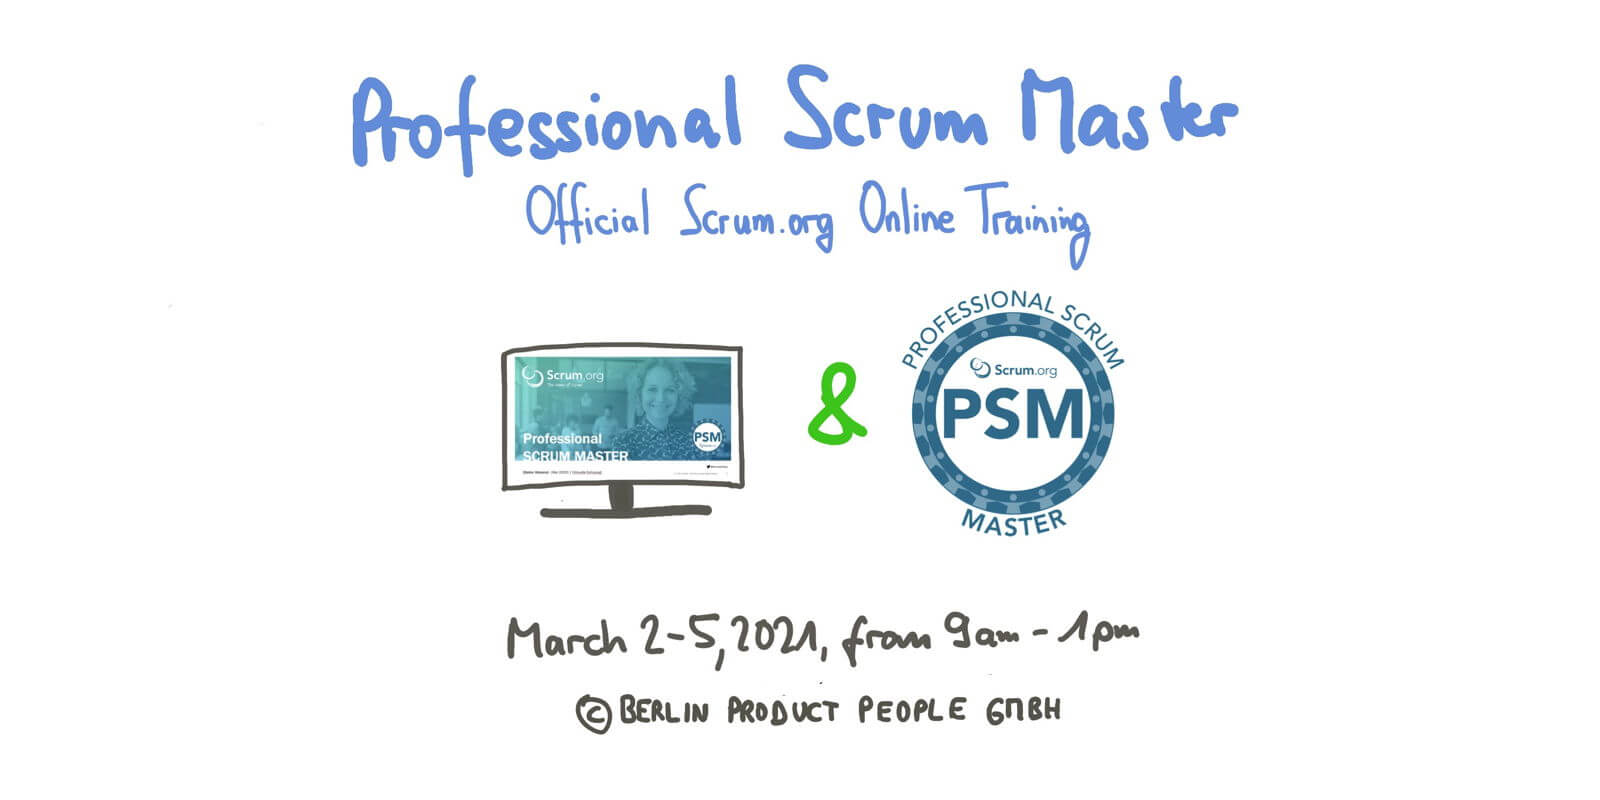 Professional Scrum Master Training with PSM I Certificate: March 2-5, 2021 — Berlin Product People GmbH